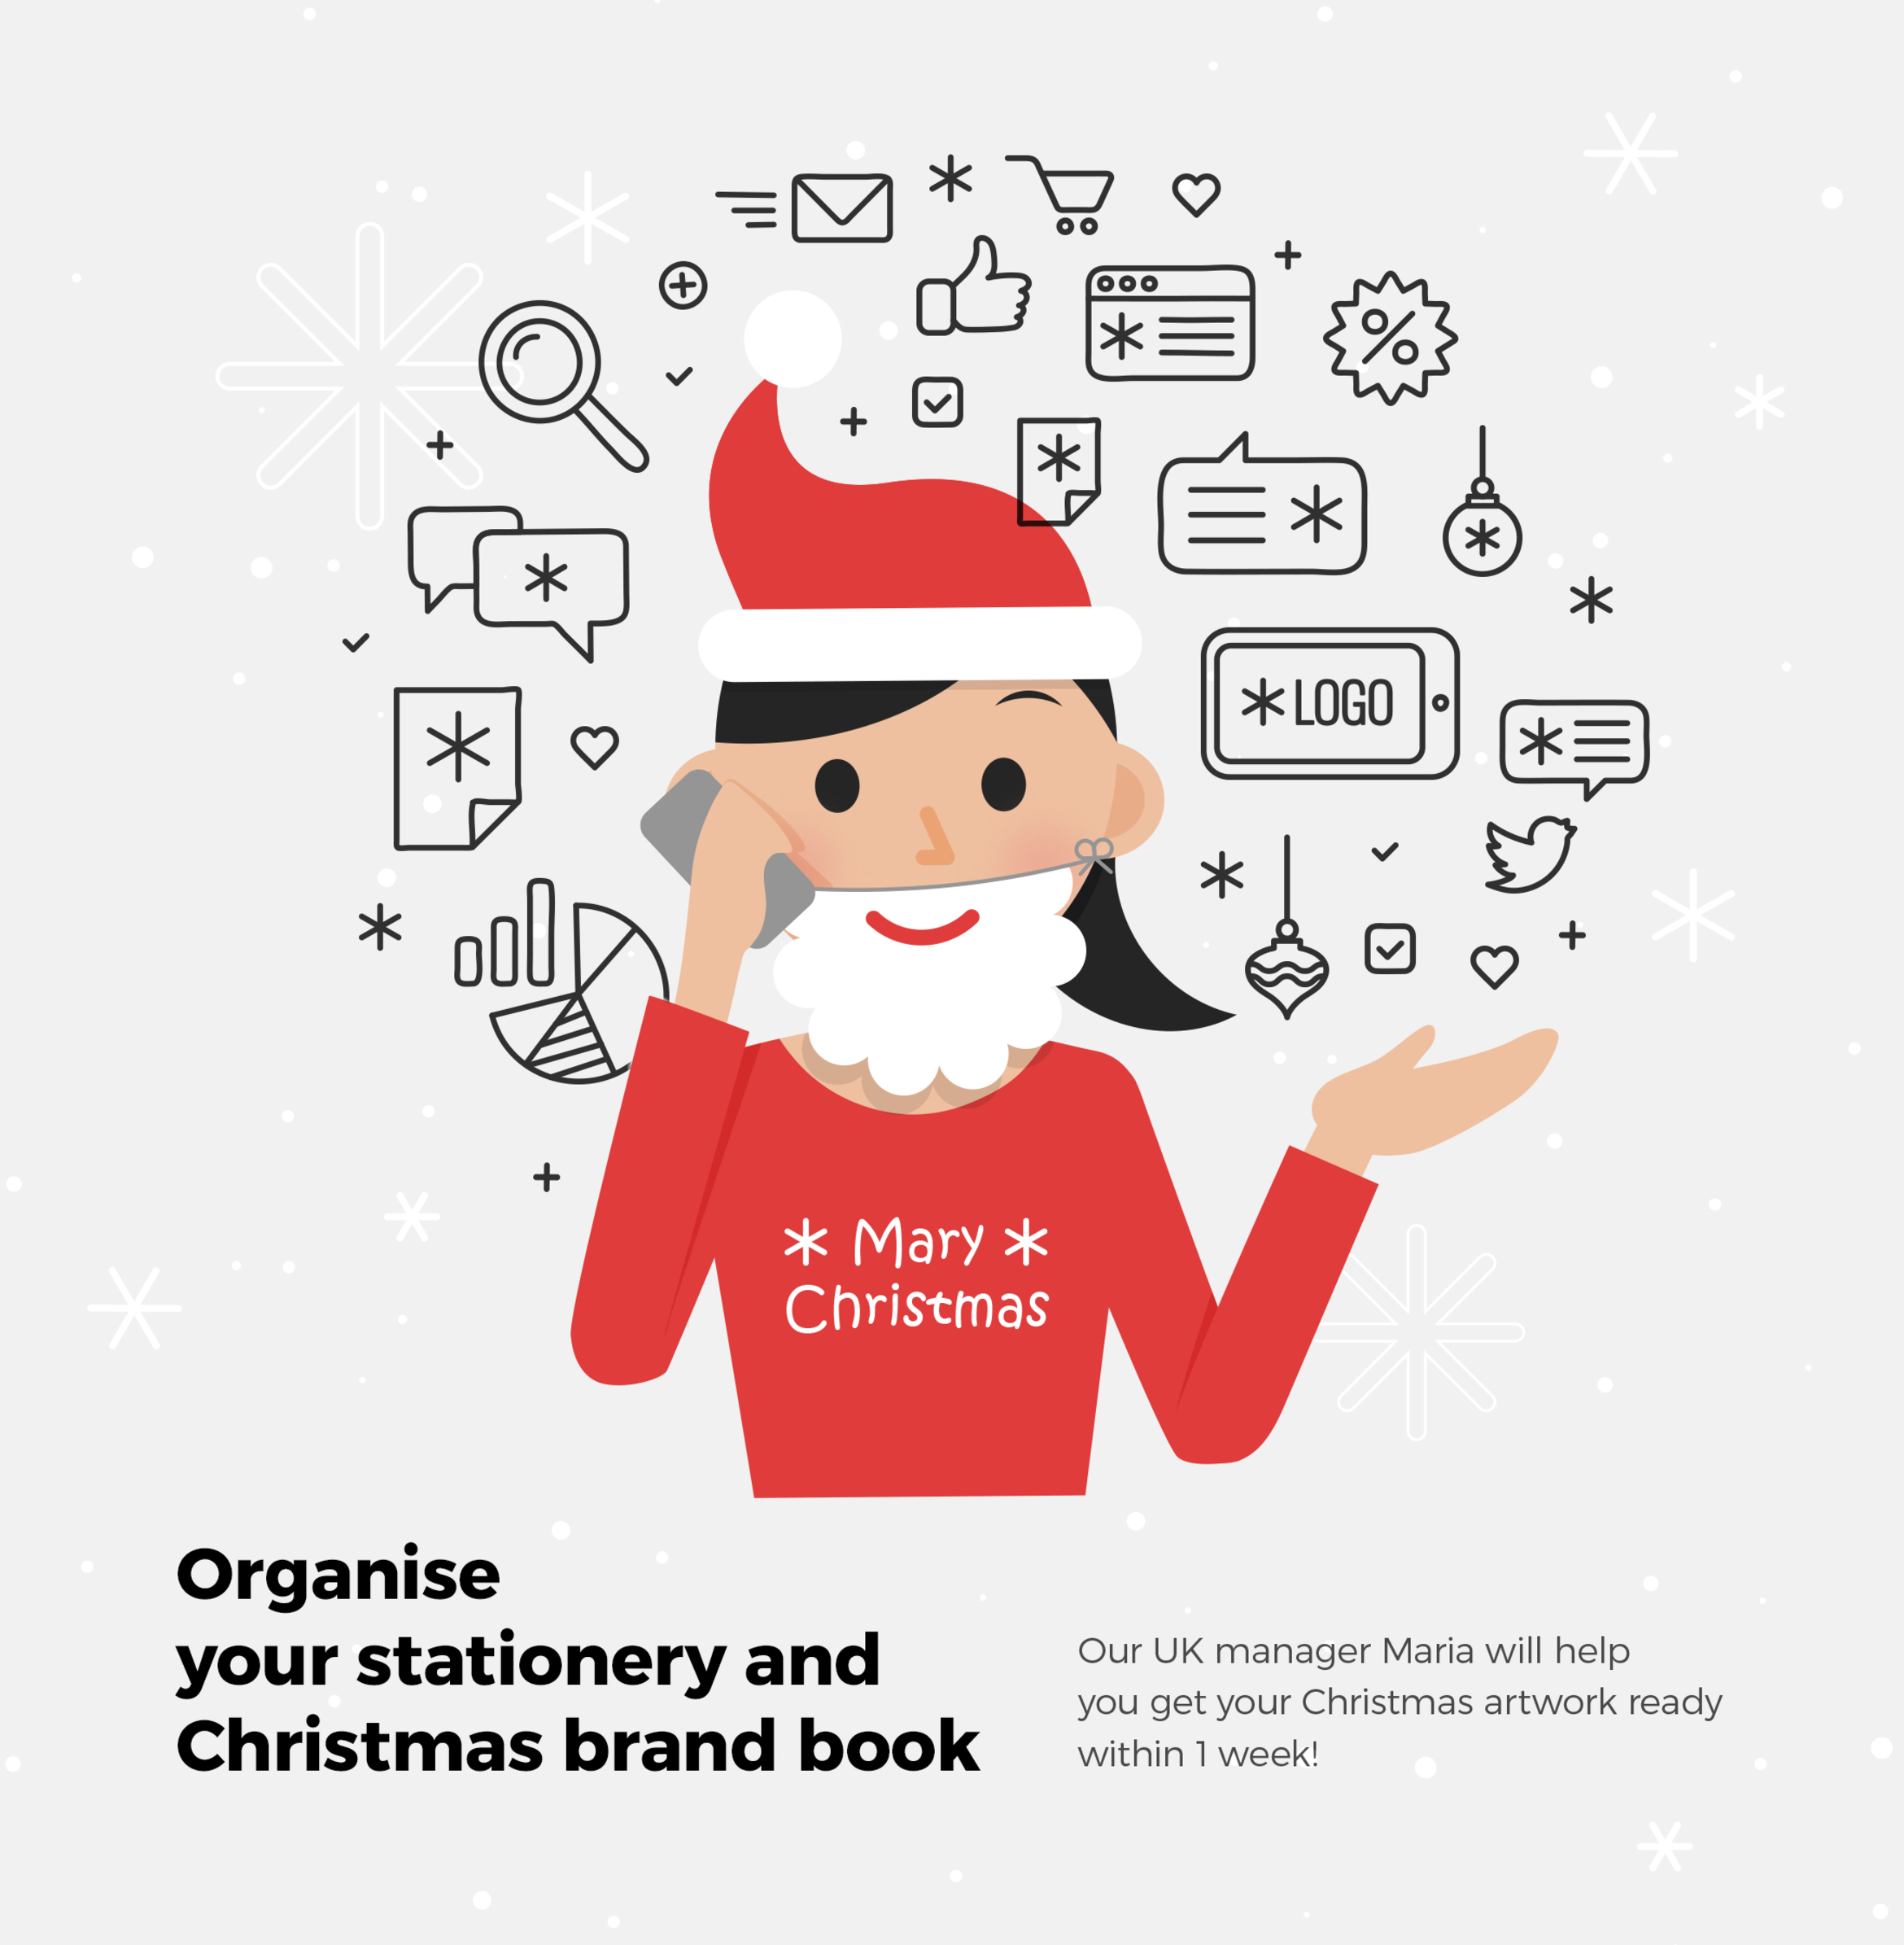 Organise your Stationery and Christmas brand book!